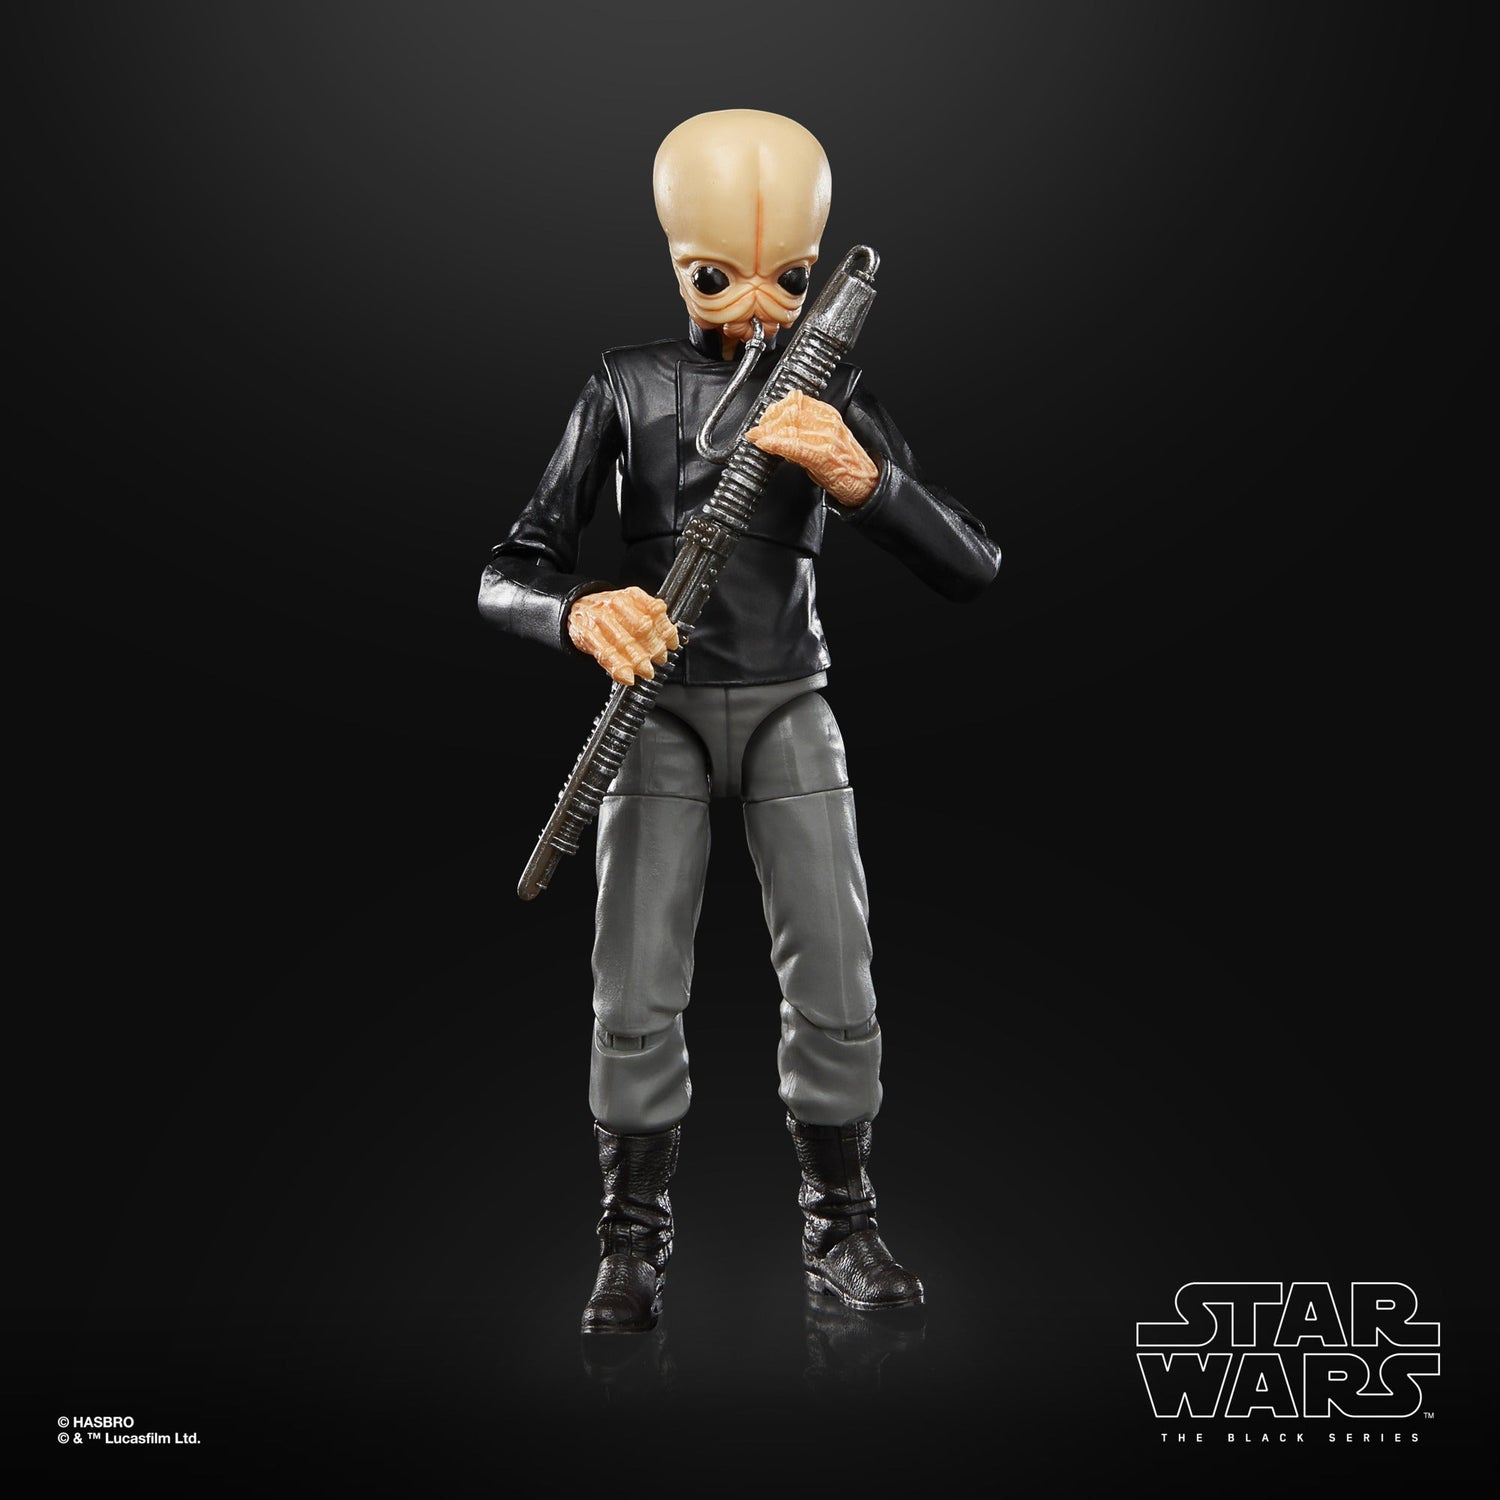 Star Wars: The Black Series Figrin D’an Case Of 5 Hasbro